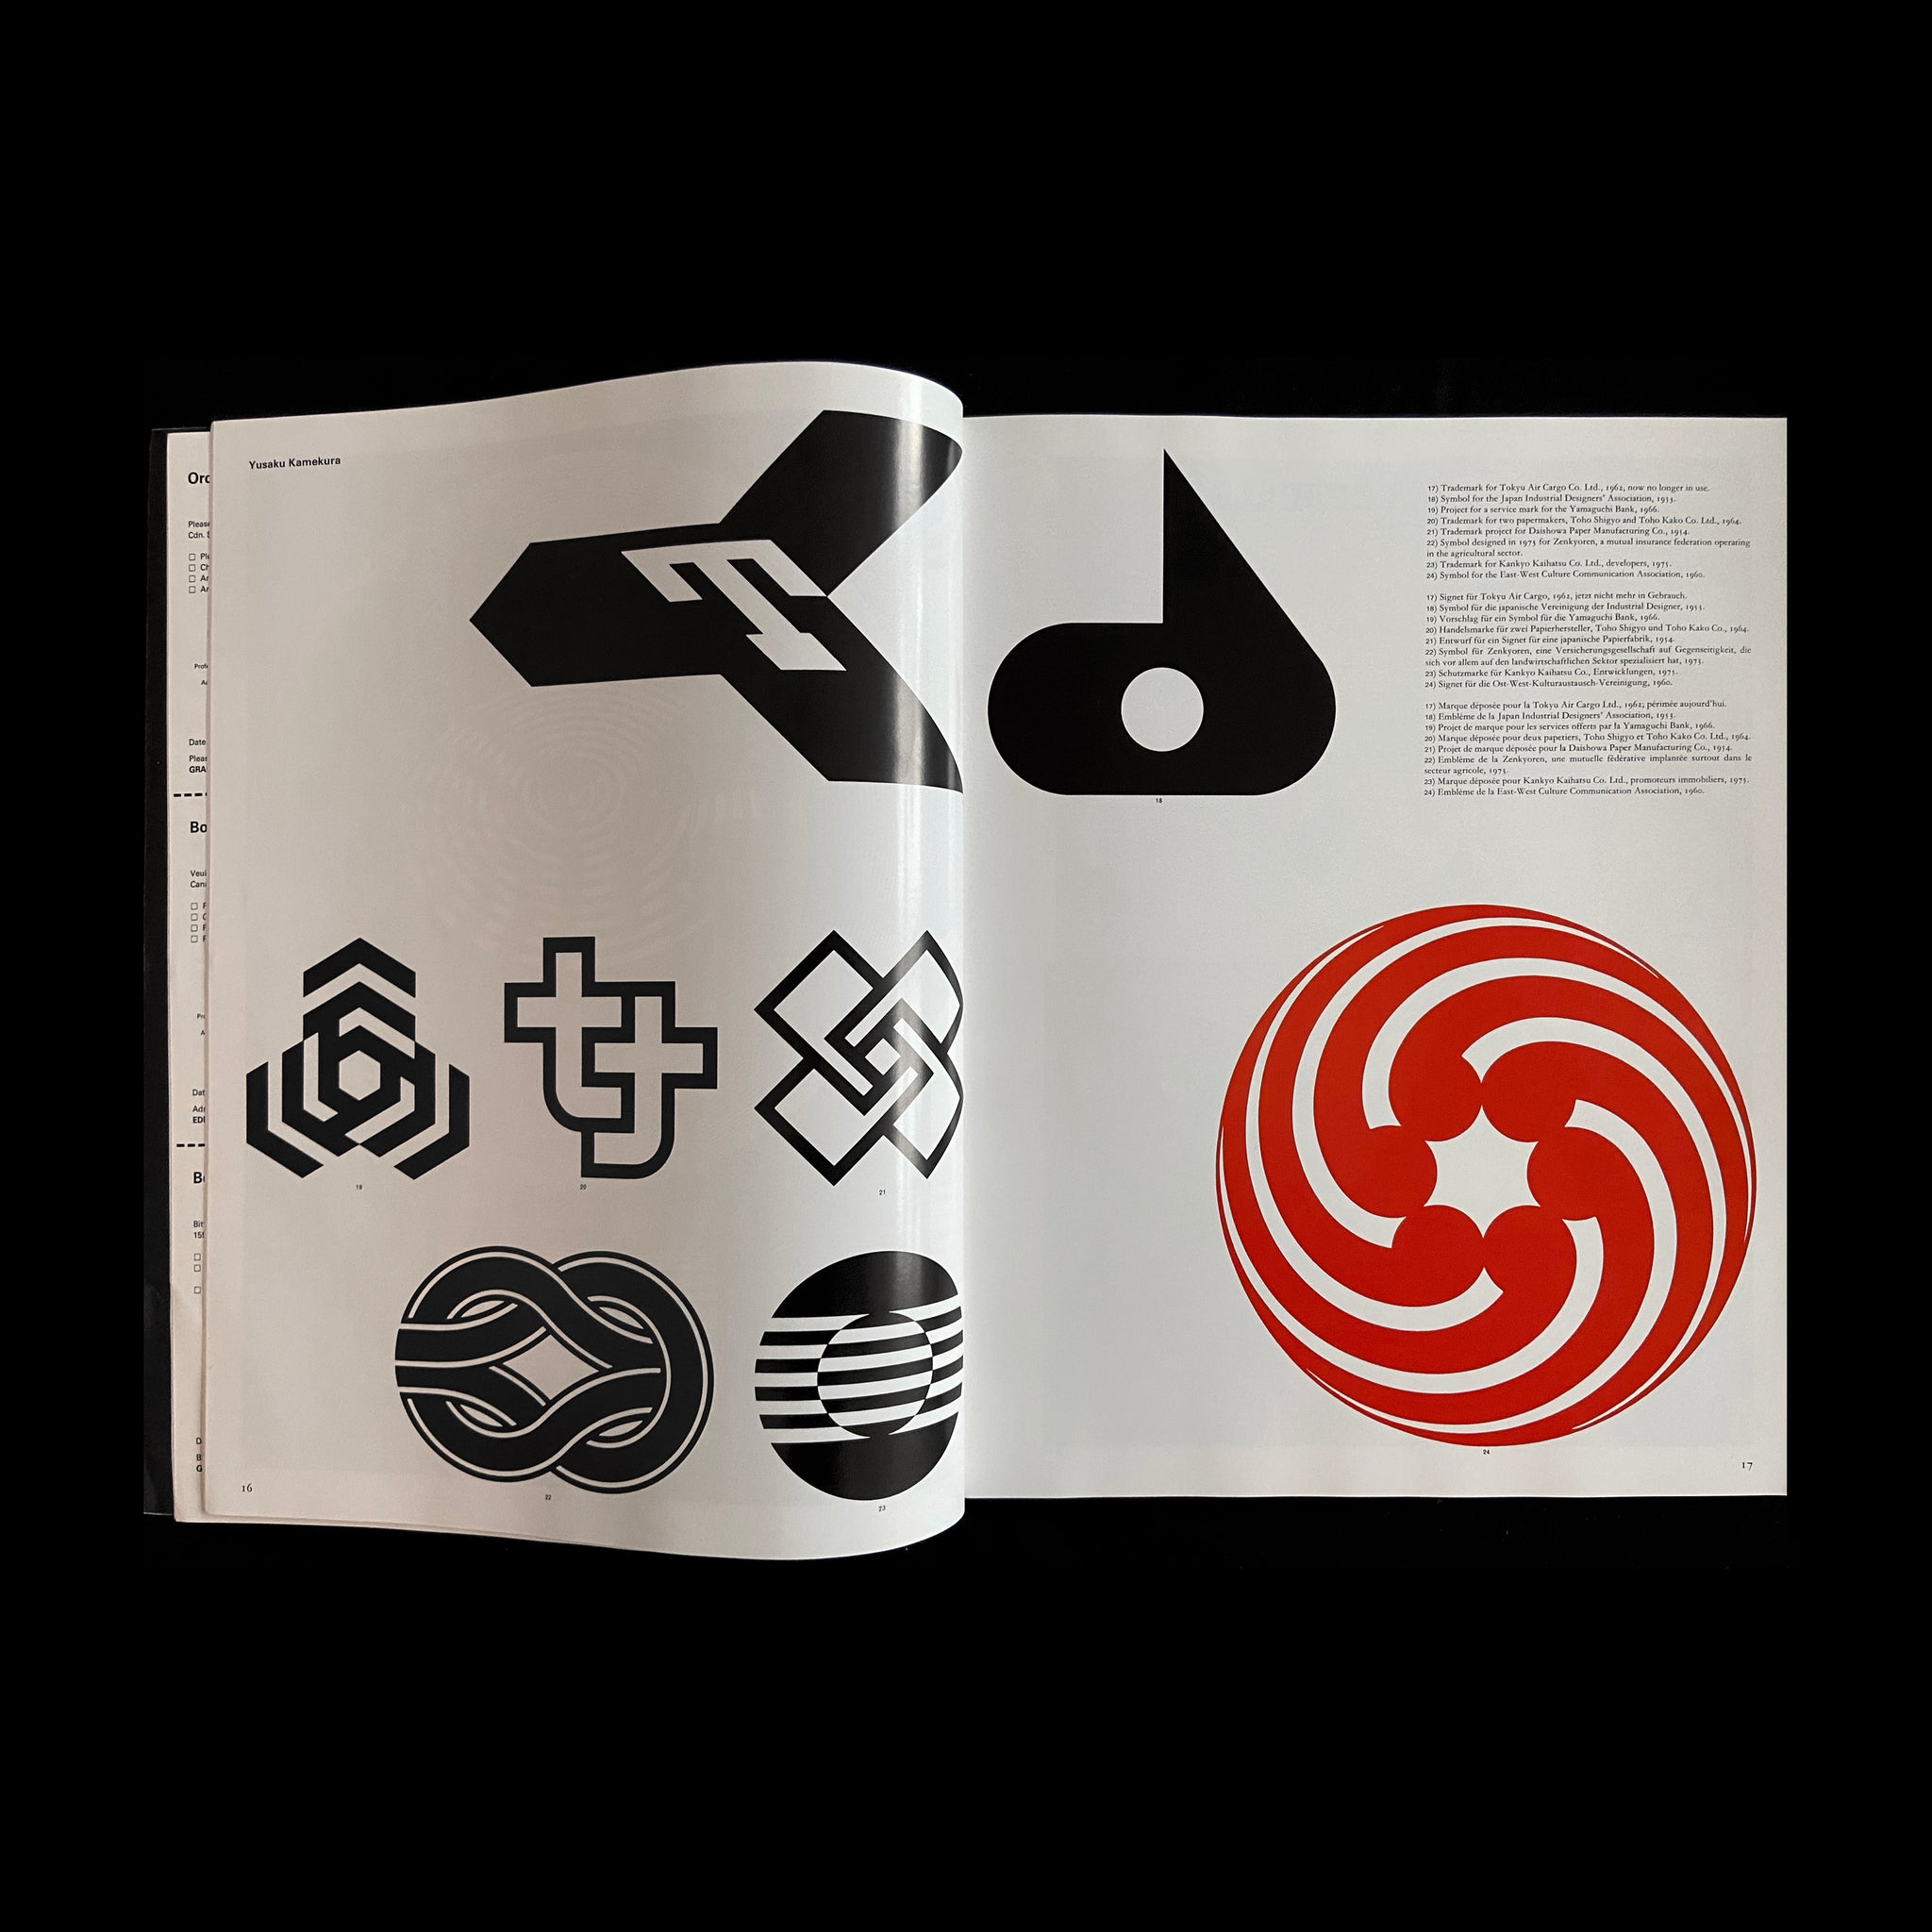 Graphis, Issue 230, 1984